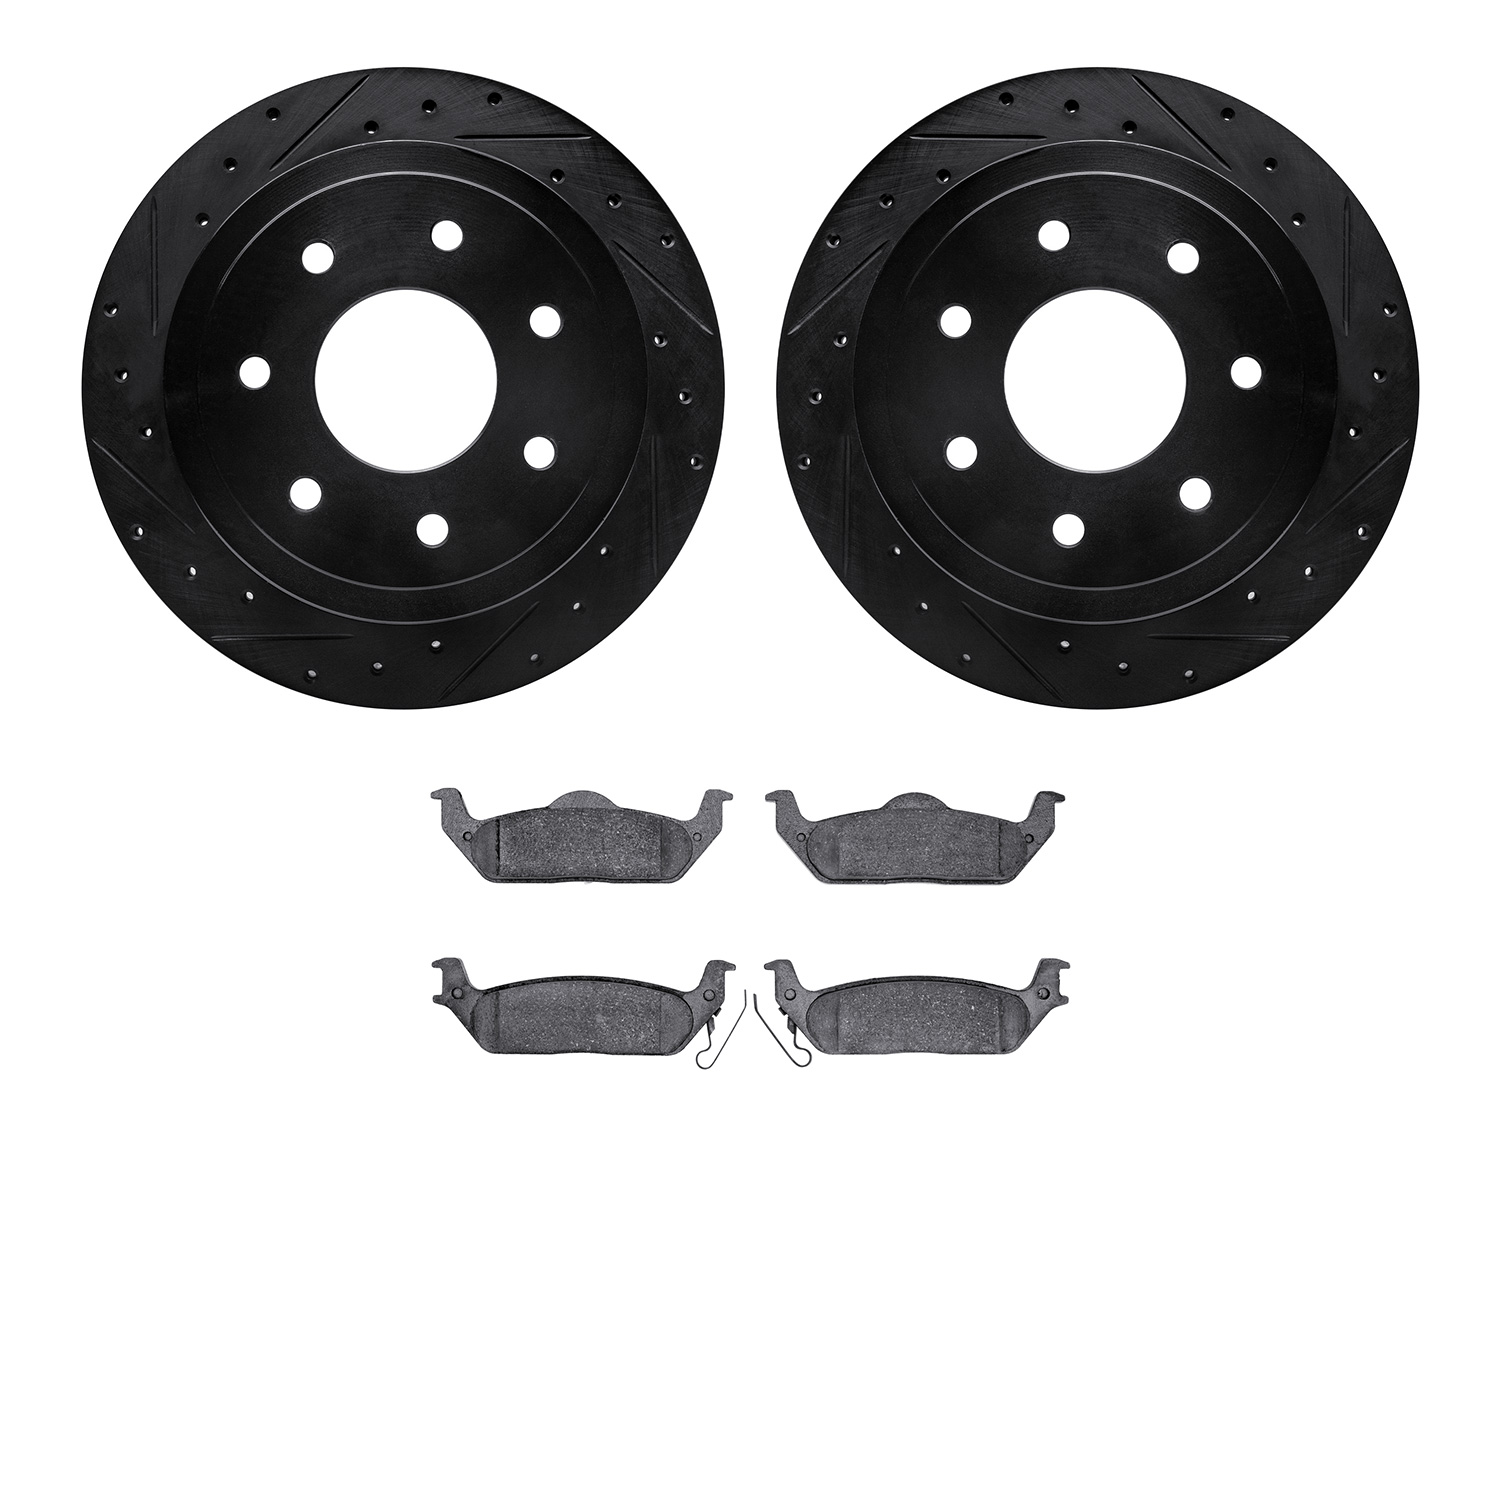 8402-54075 Drilled/Slotted Brake Rotors with Ultimate-Duty Brake Pads Kit [Black], 2004-2011 Ford/Lincoln/Mercury/Mazda, Positio